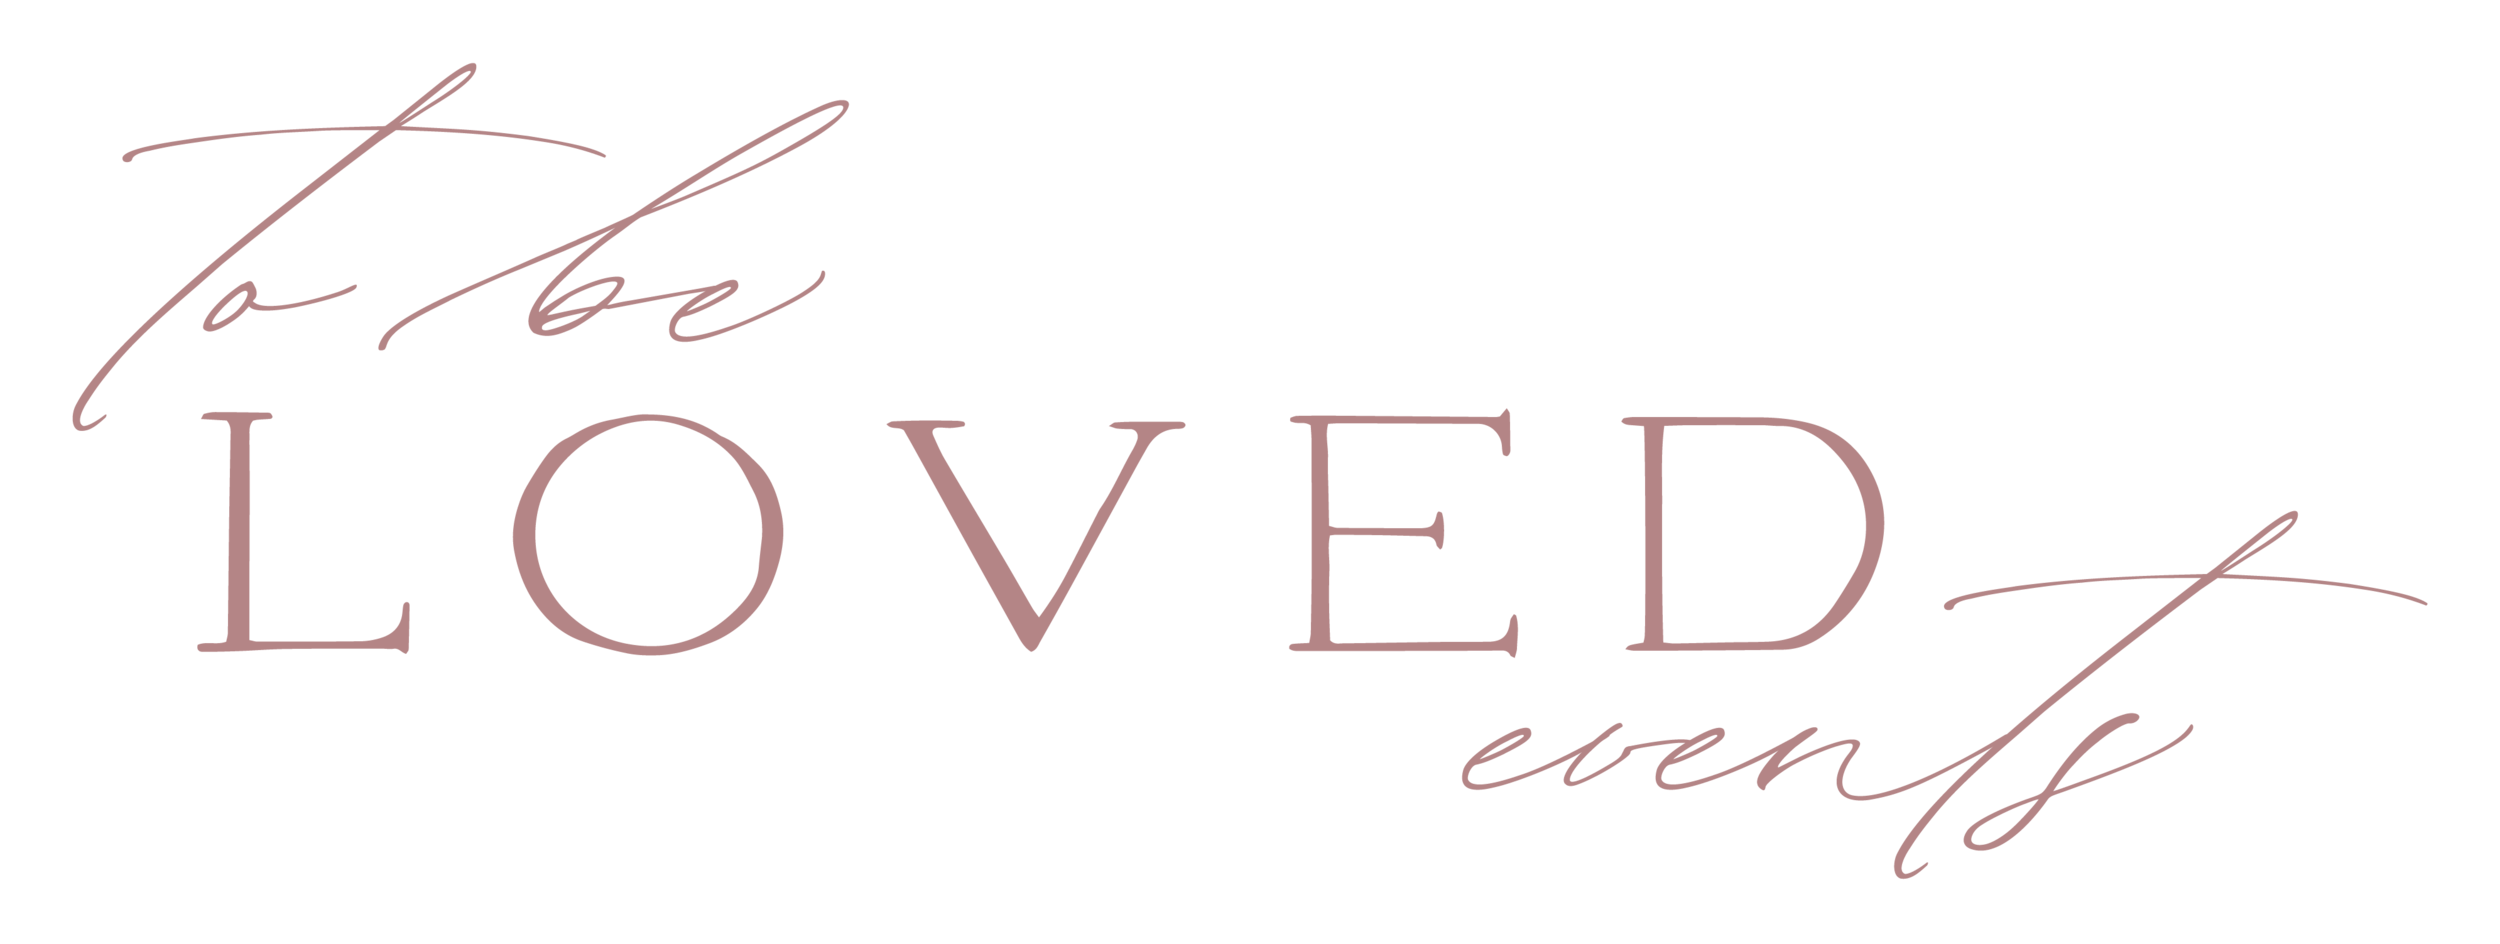 To Be Loved Events